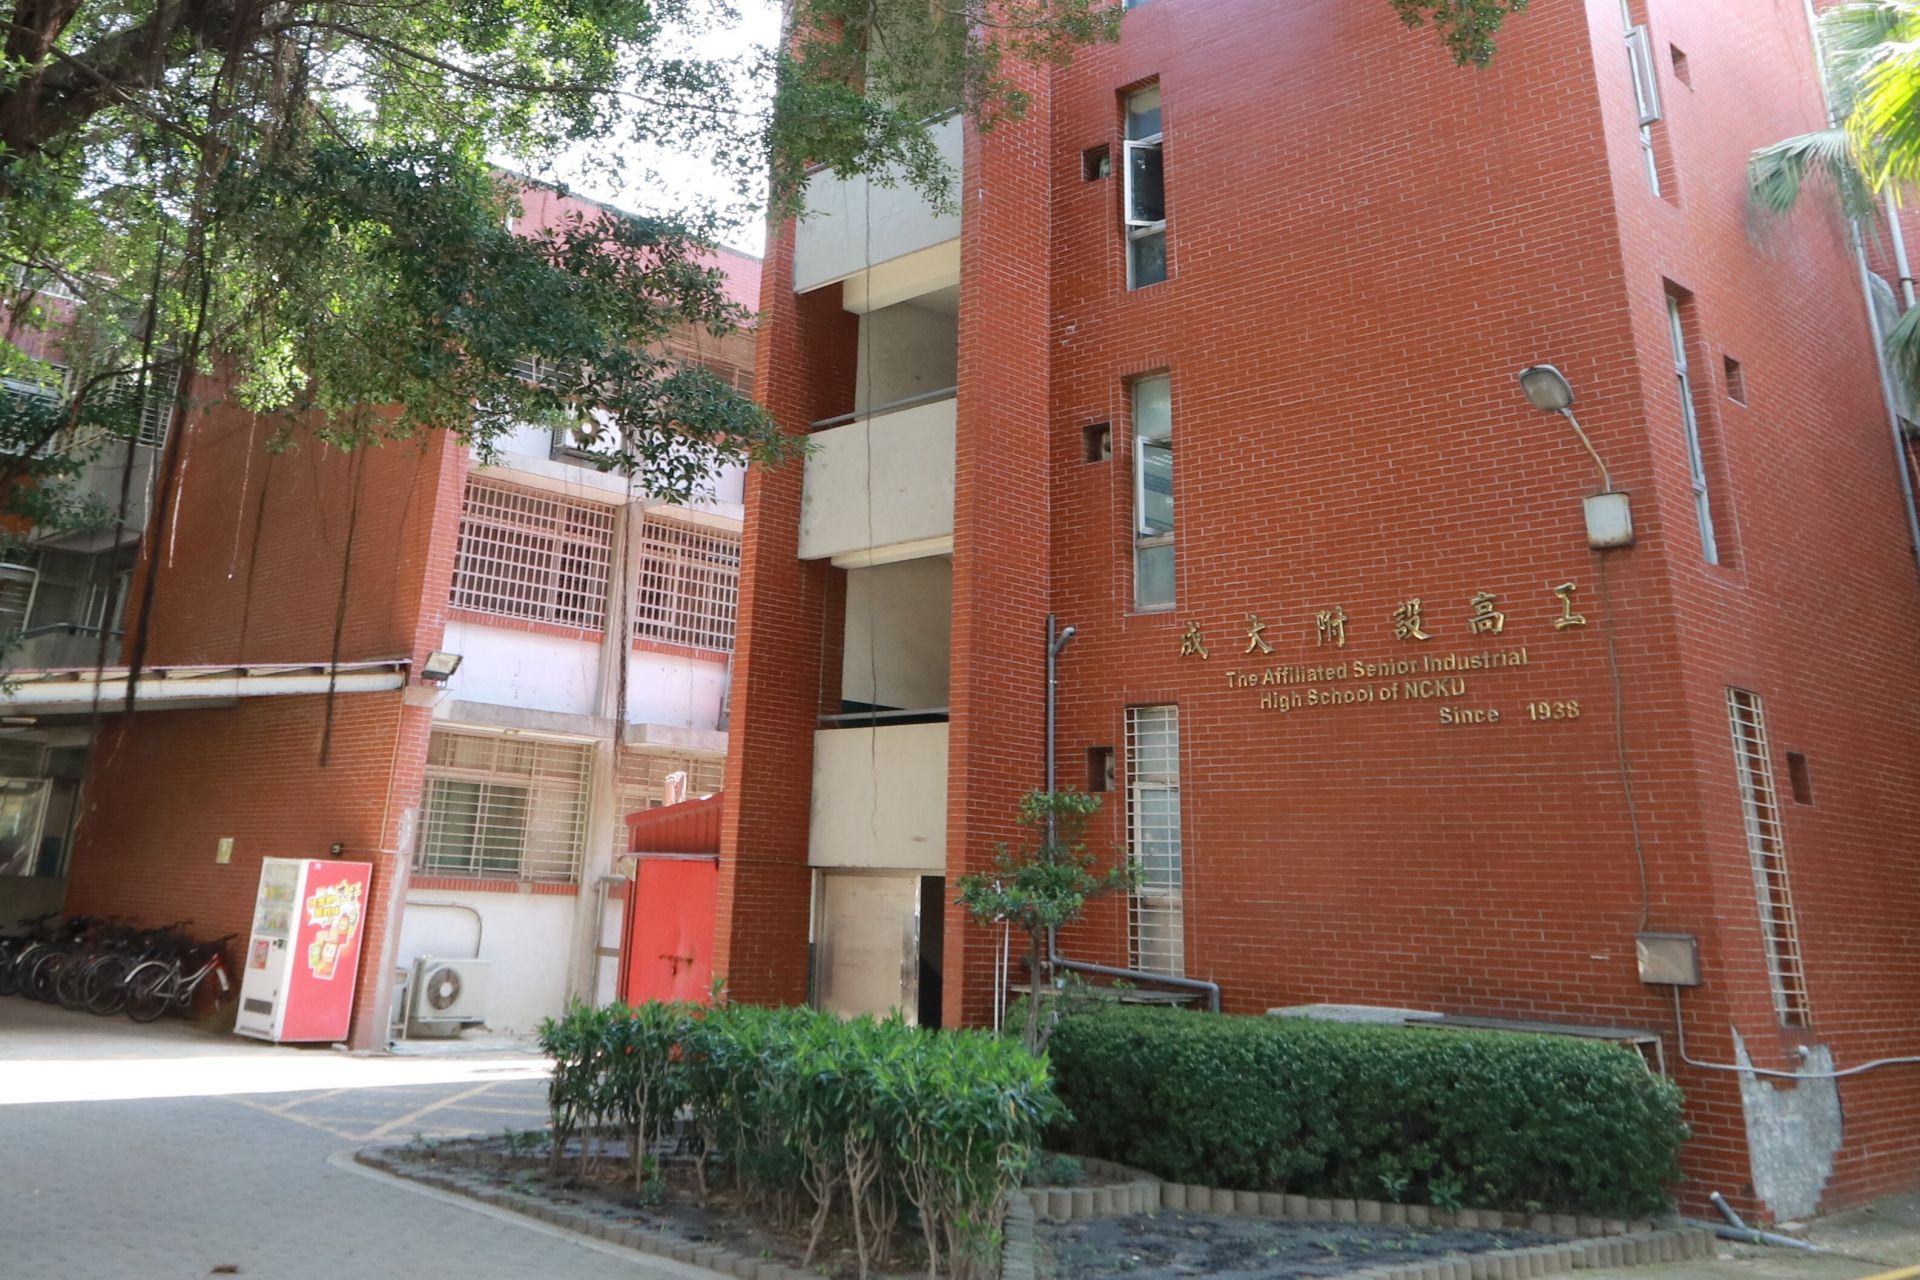 National Tainan Industrial Vocational School's Transition to Affiliation with NCKU